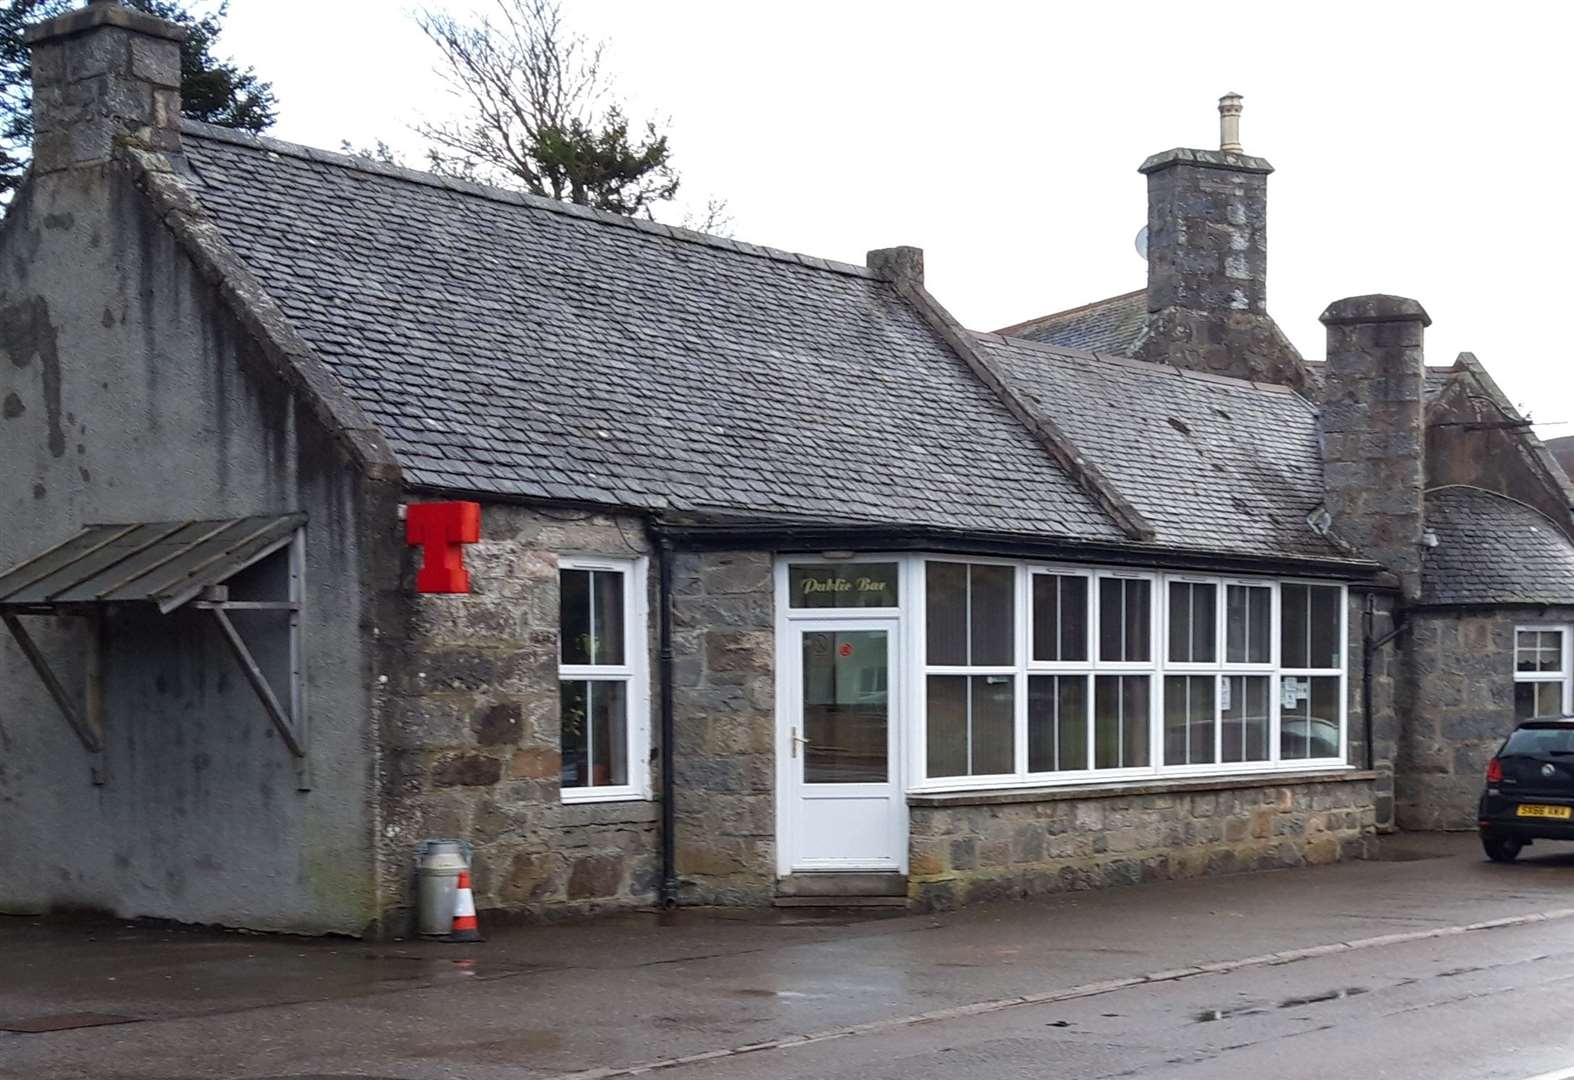 Community council chairman welcomes sale of Rogart hostelry